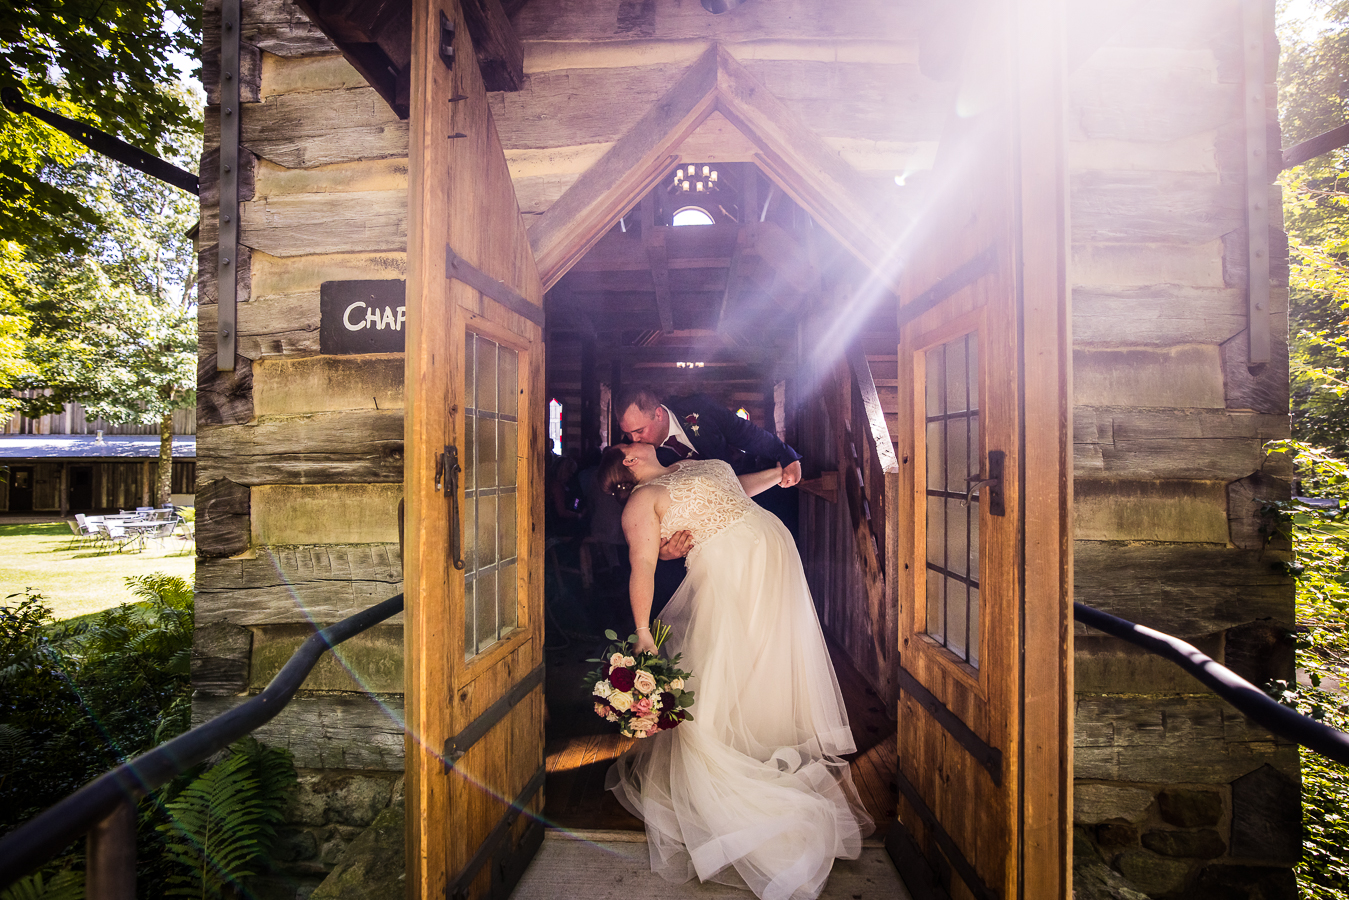 Oak Lodge Wedding Photographer, rhinehart photography, captures this romantic portrait of the bride and groom as they share a dip and a kiss at the entrance of the log chapel as a beam of light shines down on them during their kiss 